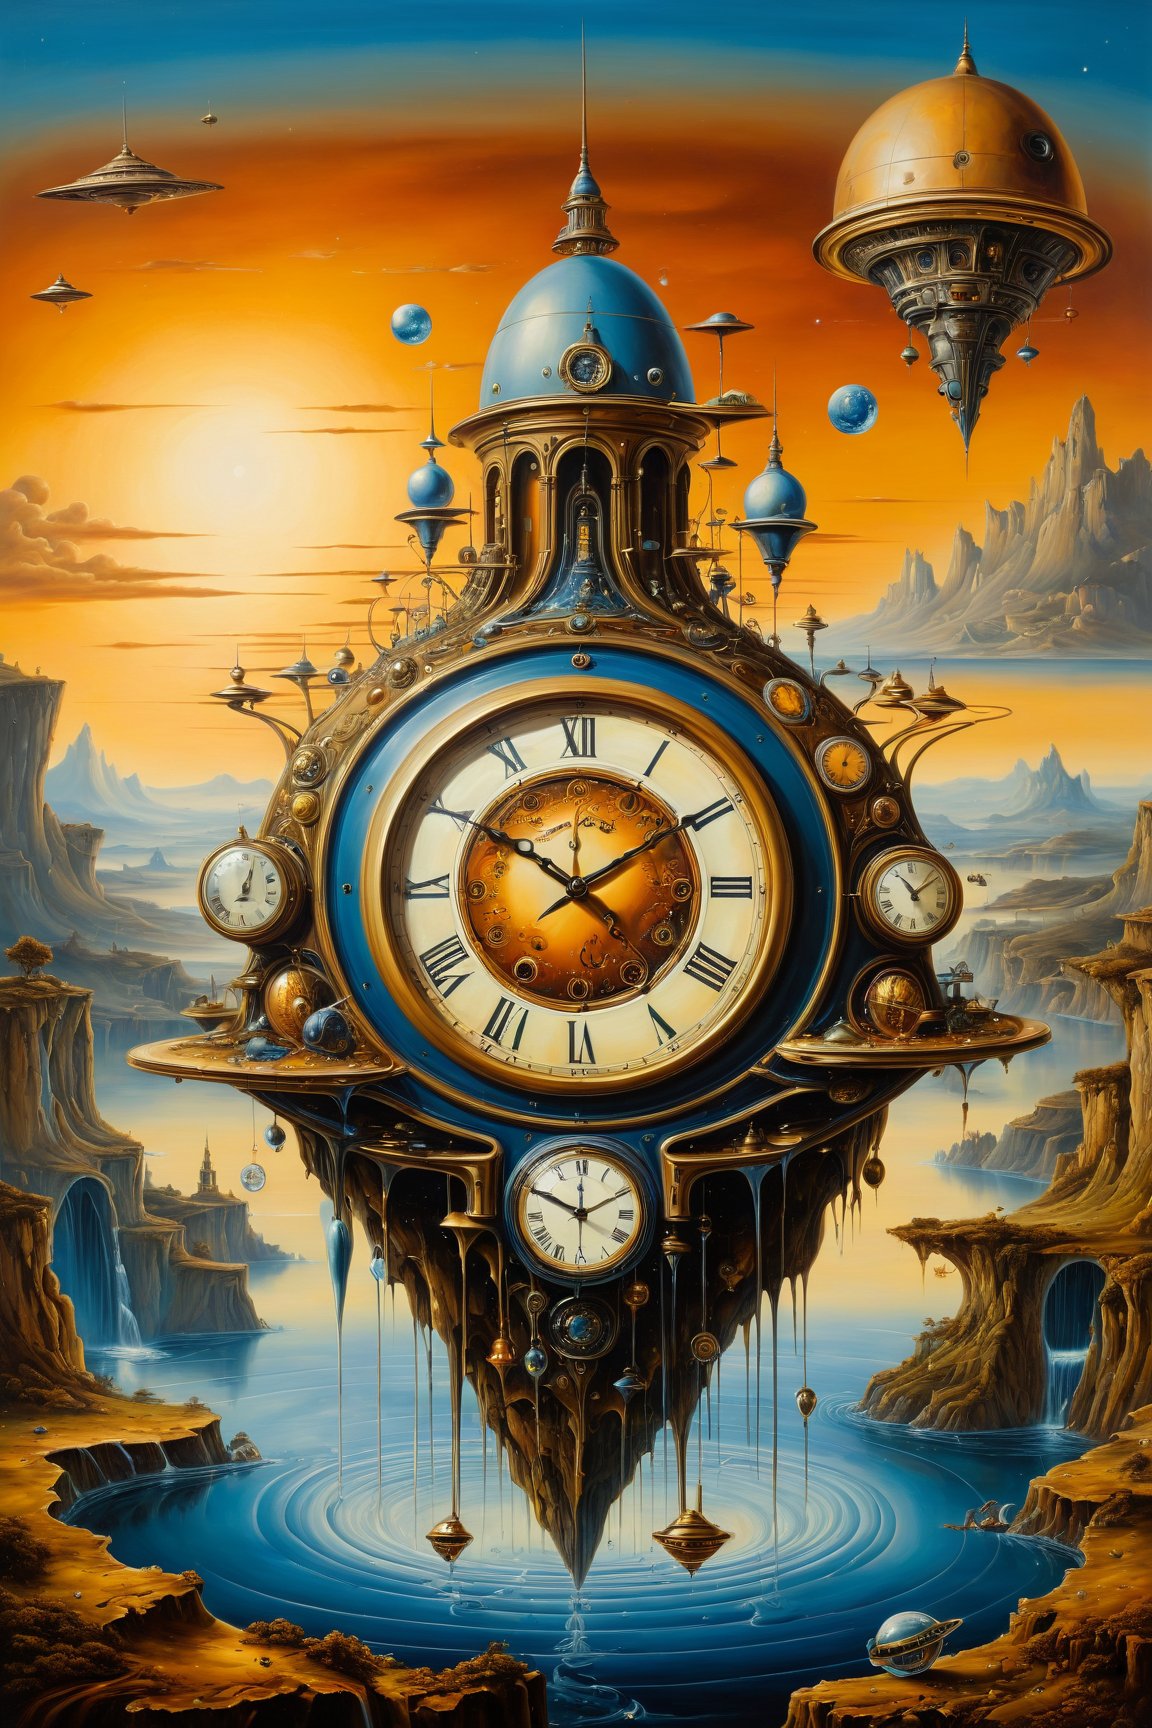 high quality, highly detailed, fantasy, At the forefront of this enchanting scene stands This surrealistic painting features melting clocks draped over various objects computer, spaceship, Salvador Dalis face, in a dreamlike landscape. Its distorted reality and unsettling beauty in the style of Leonardo Davinchi